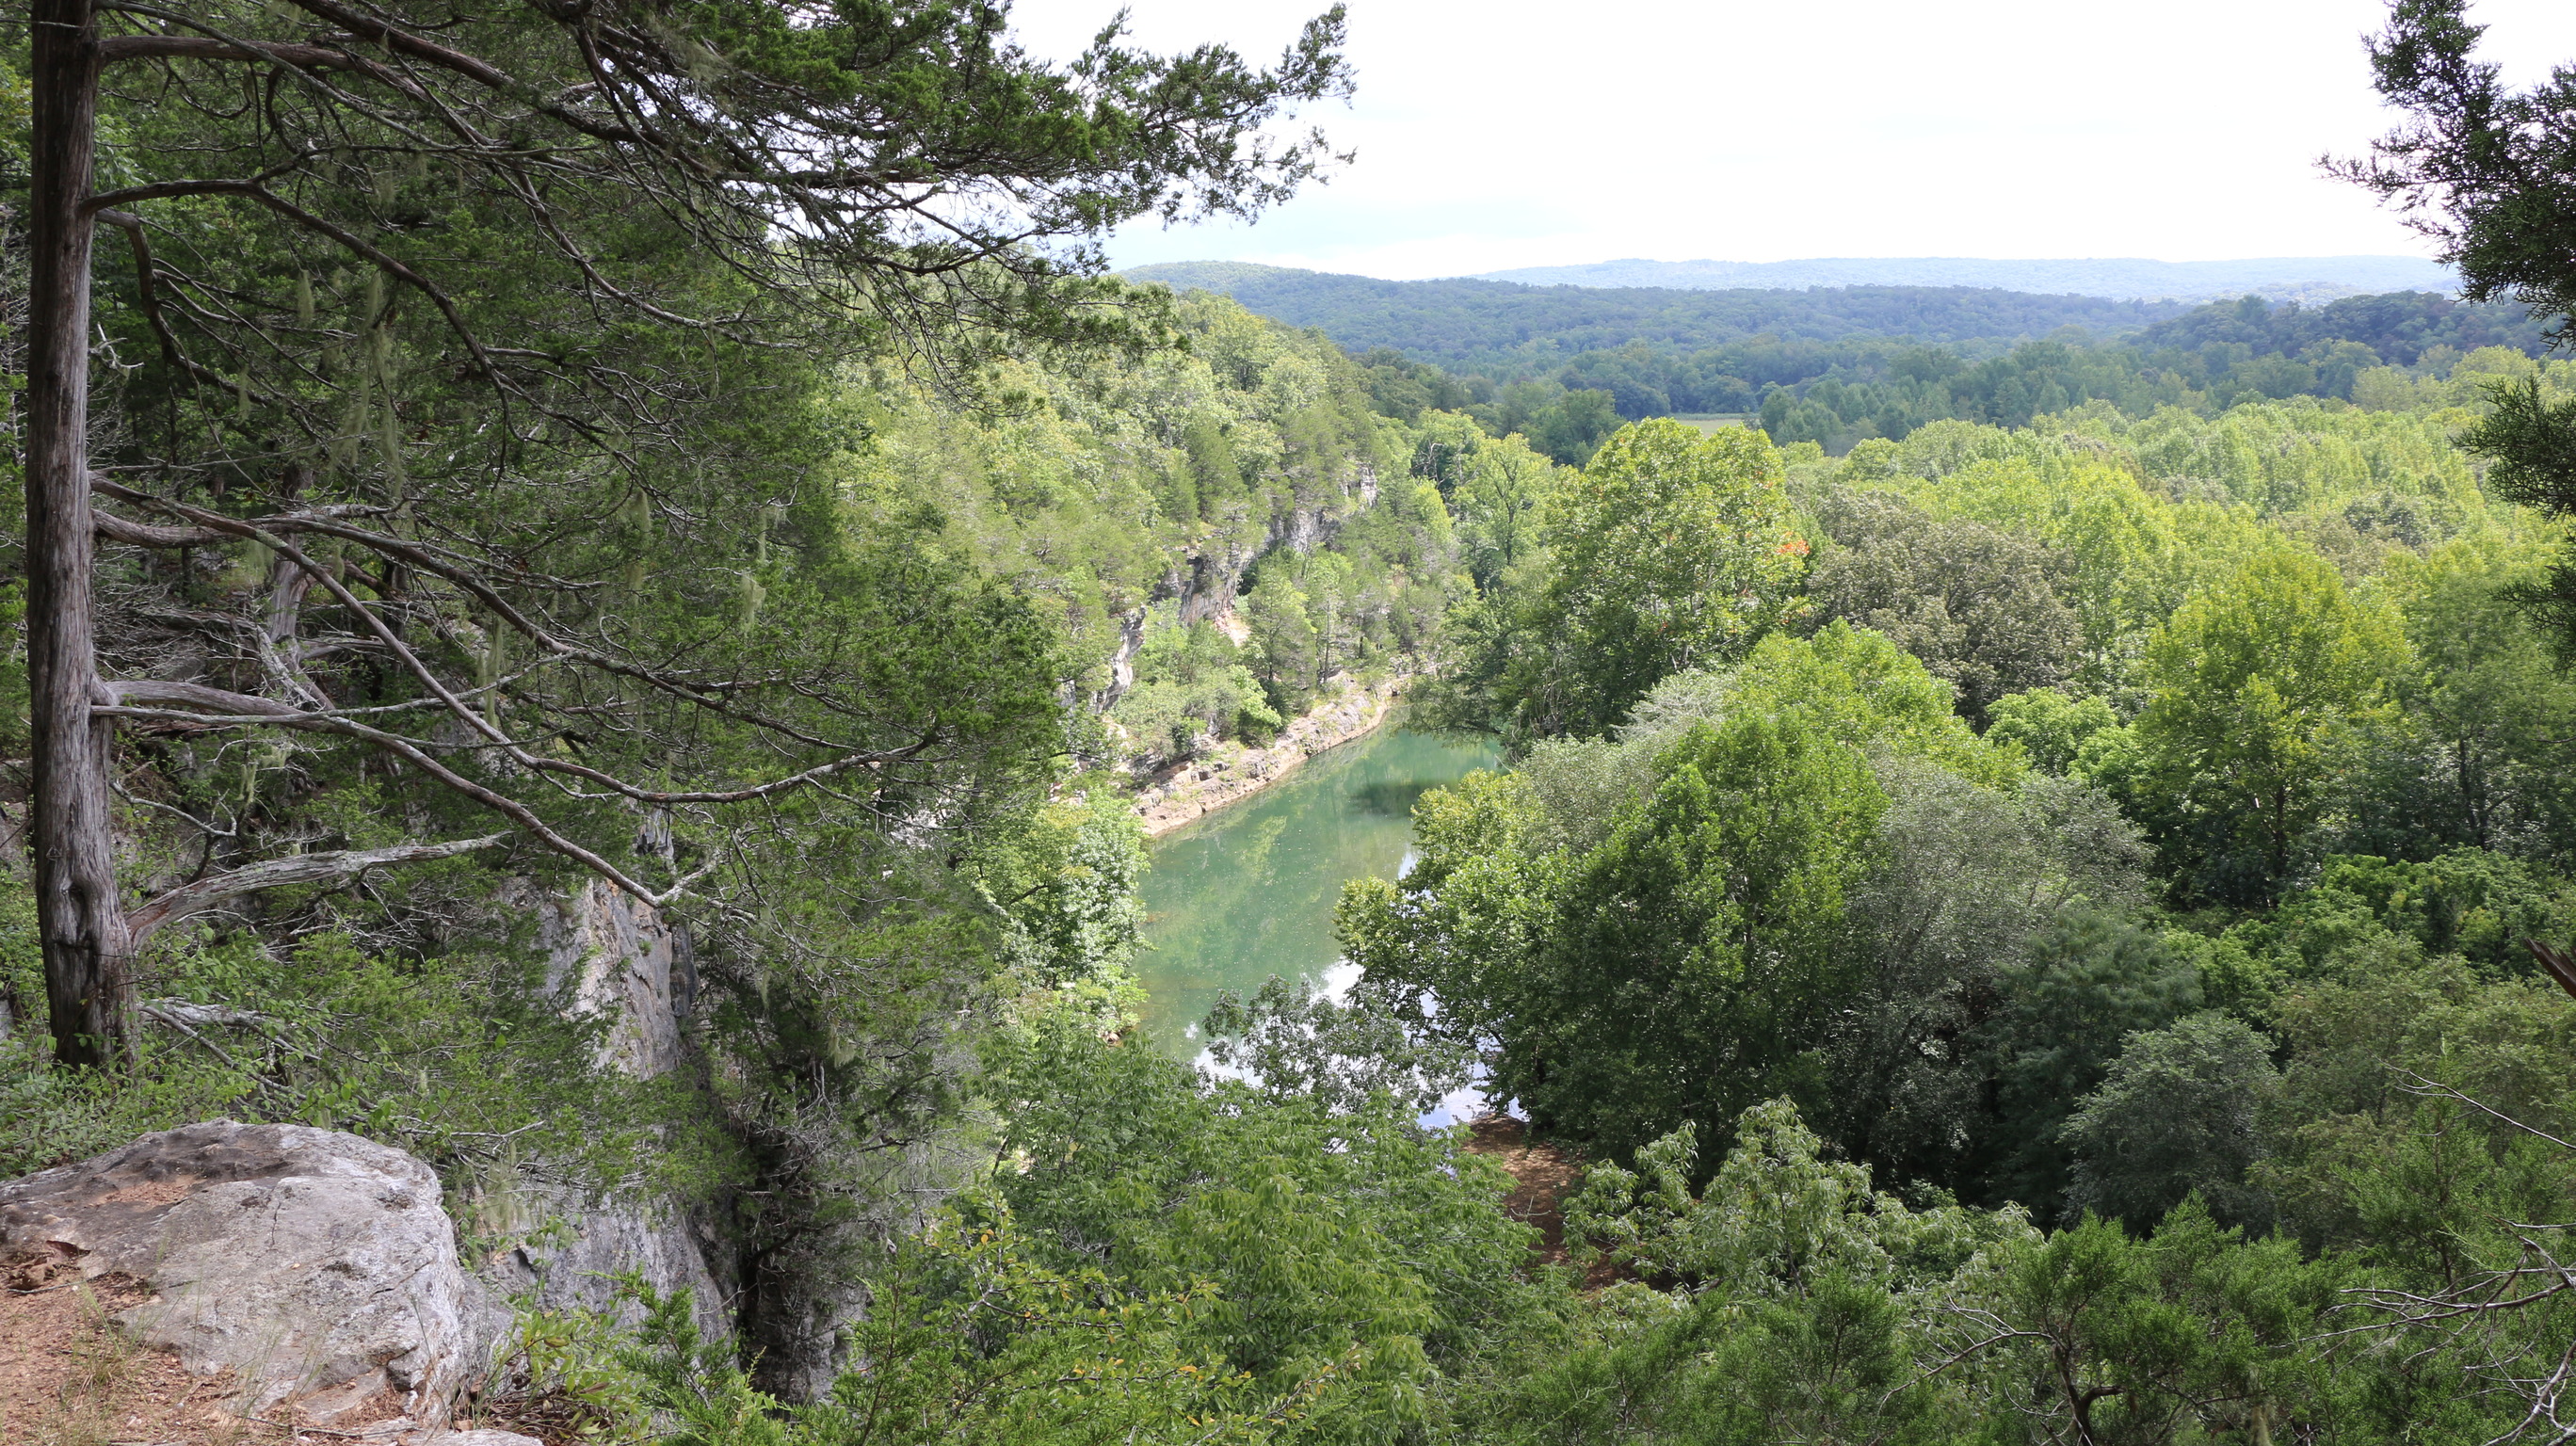 A view of the Buffalo River from Goat Bluff at Erbie